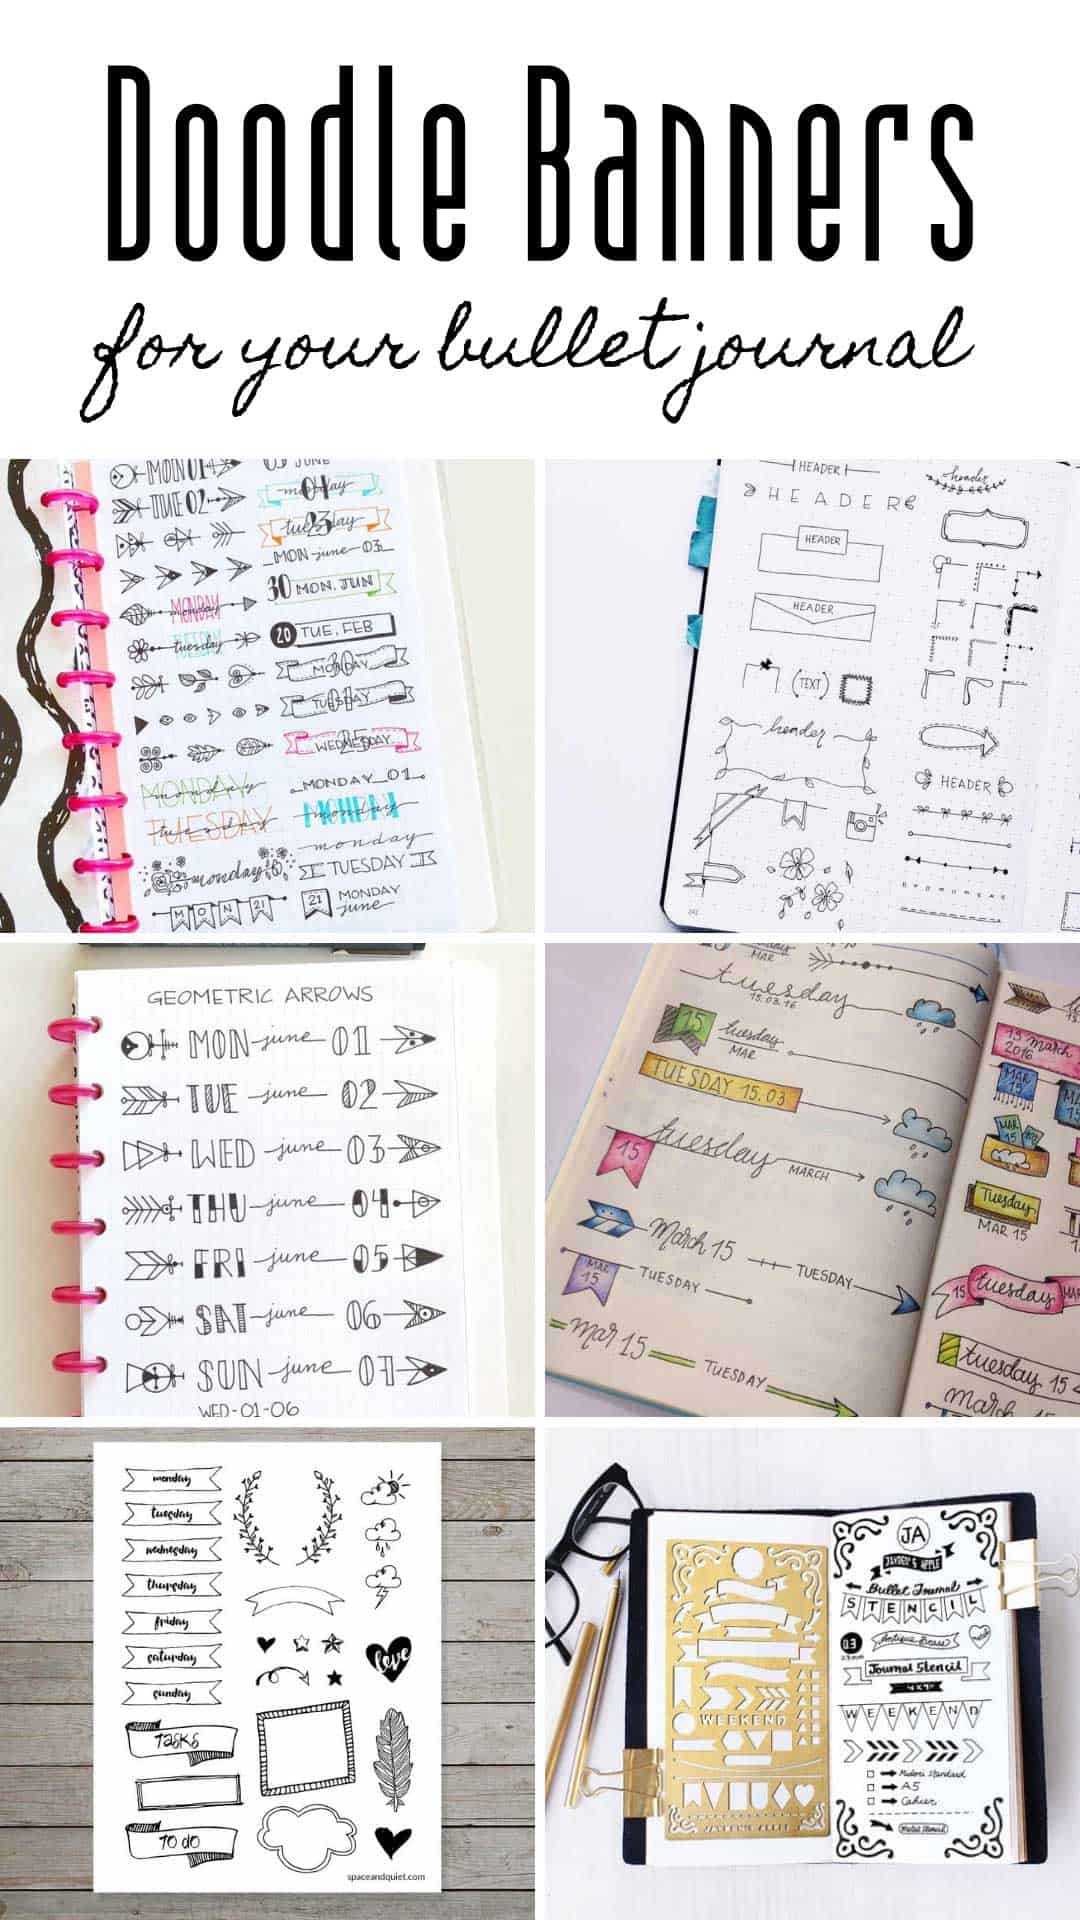 Gorgeous Bullet Journal Banners You’ll Want to Try in Your BUJO ASAP!